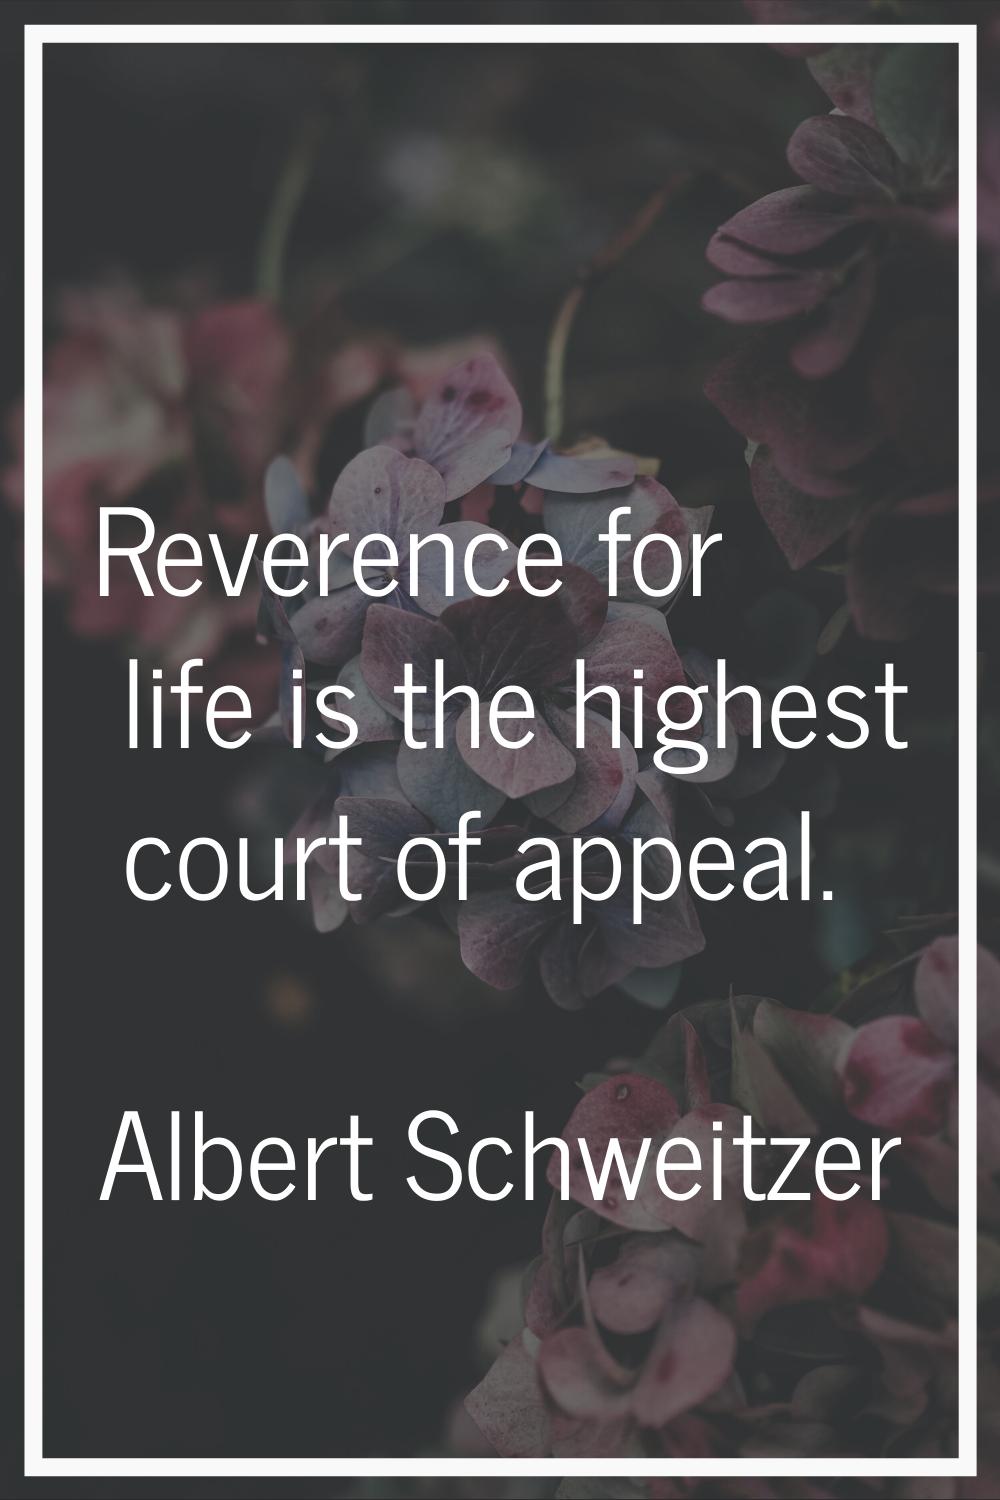 Reverence for life is the highest court of appeal.